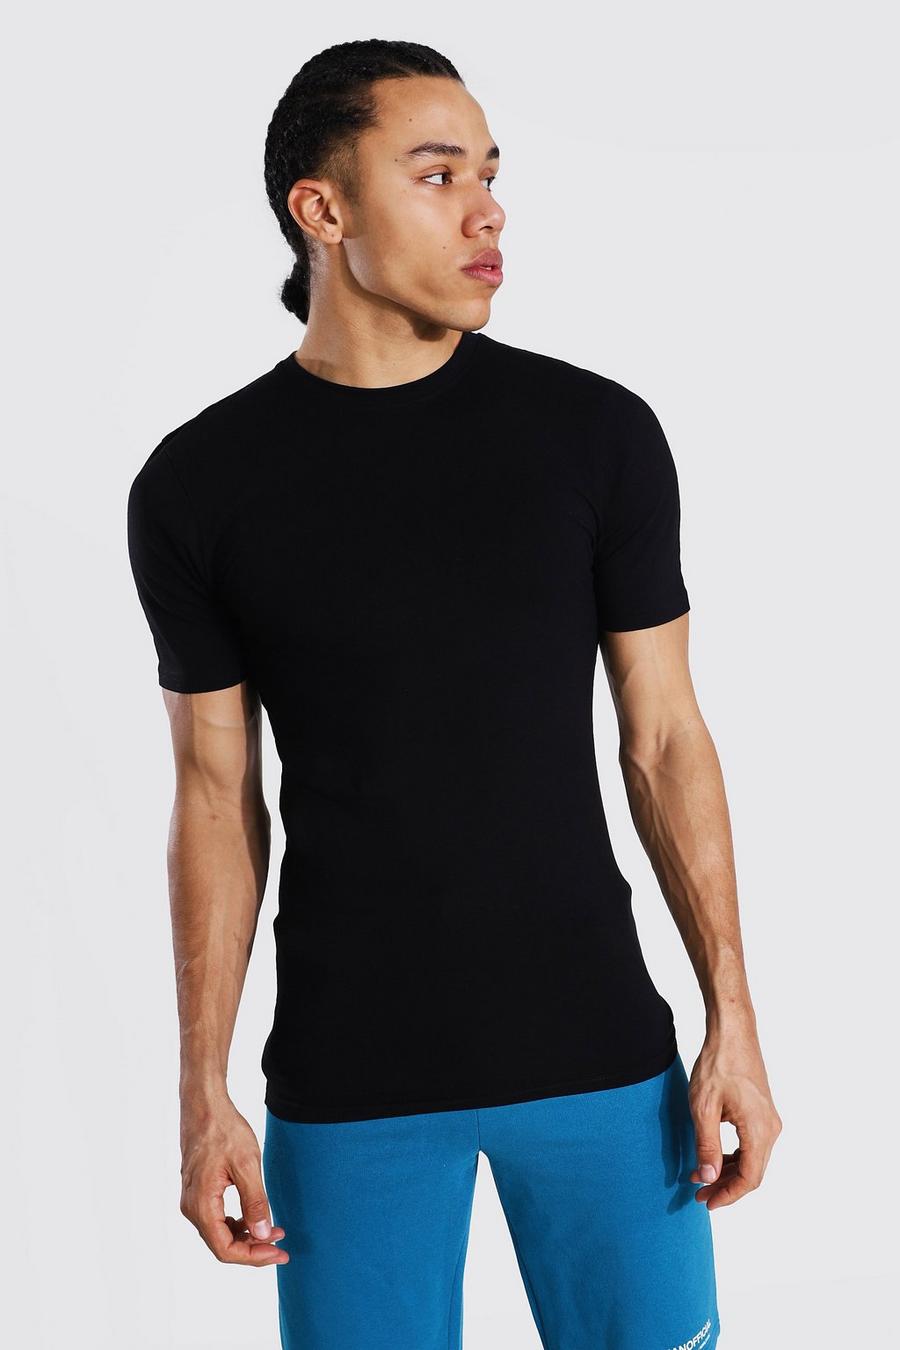 Black Tall Basic Muscle Fit T-Shirt image number 1